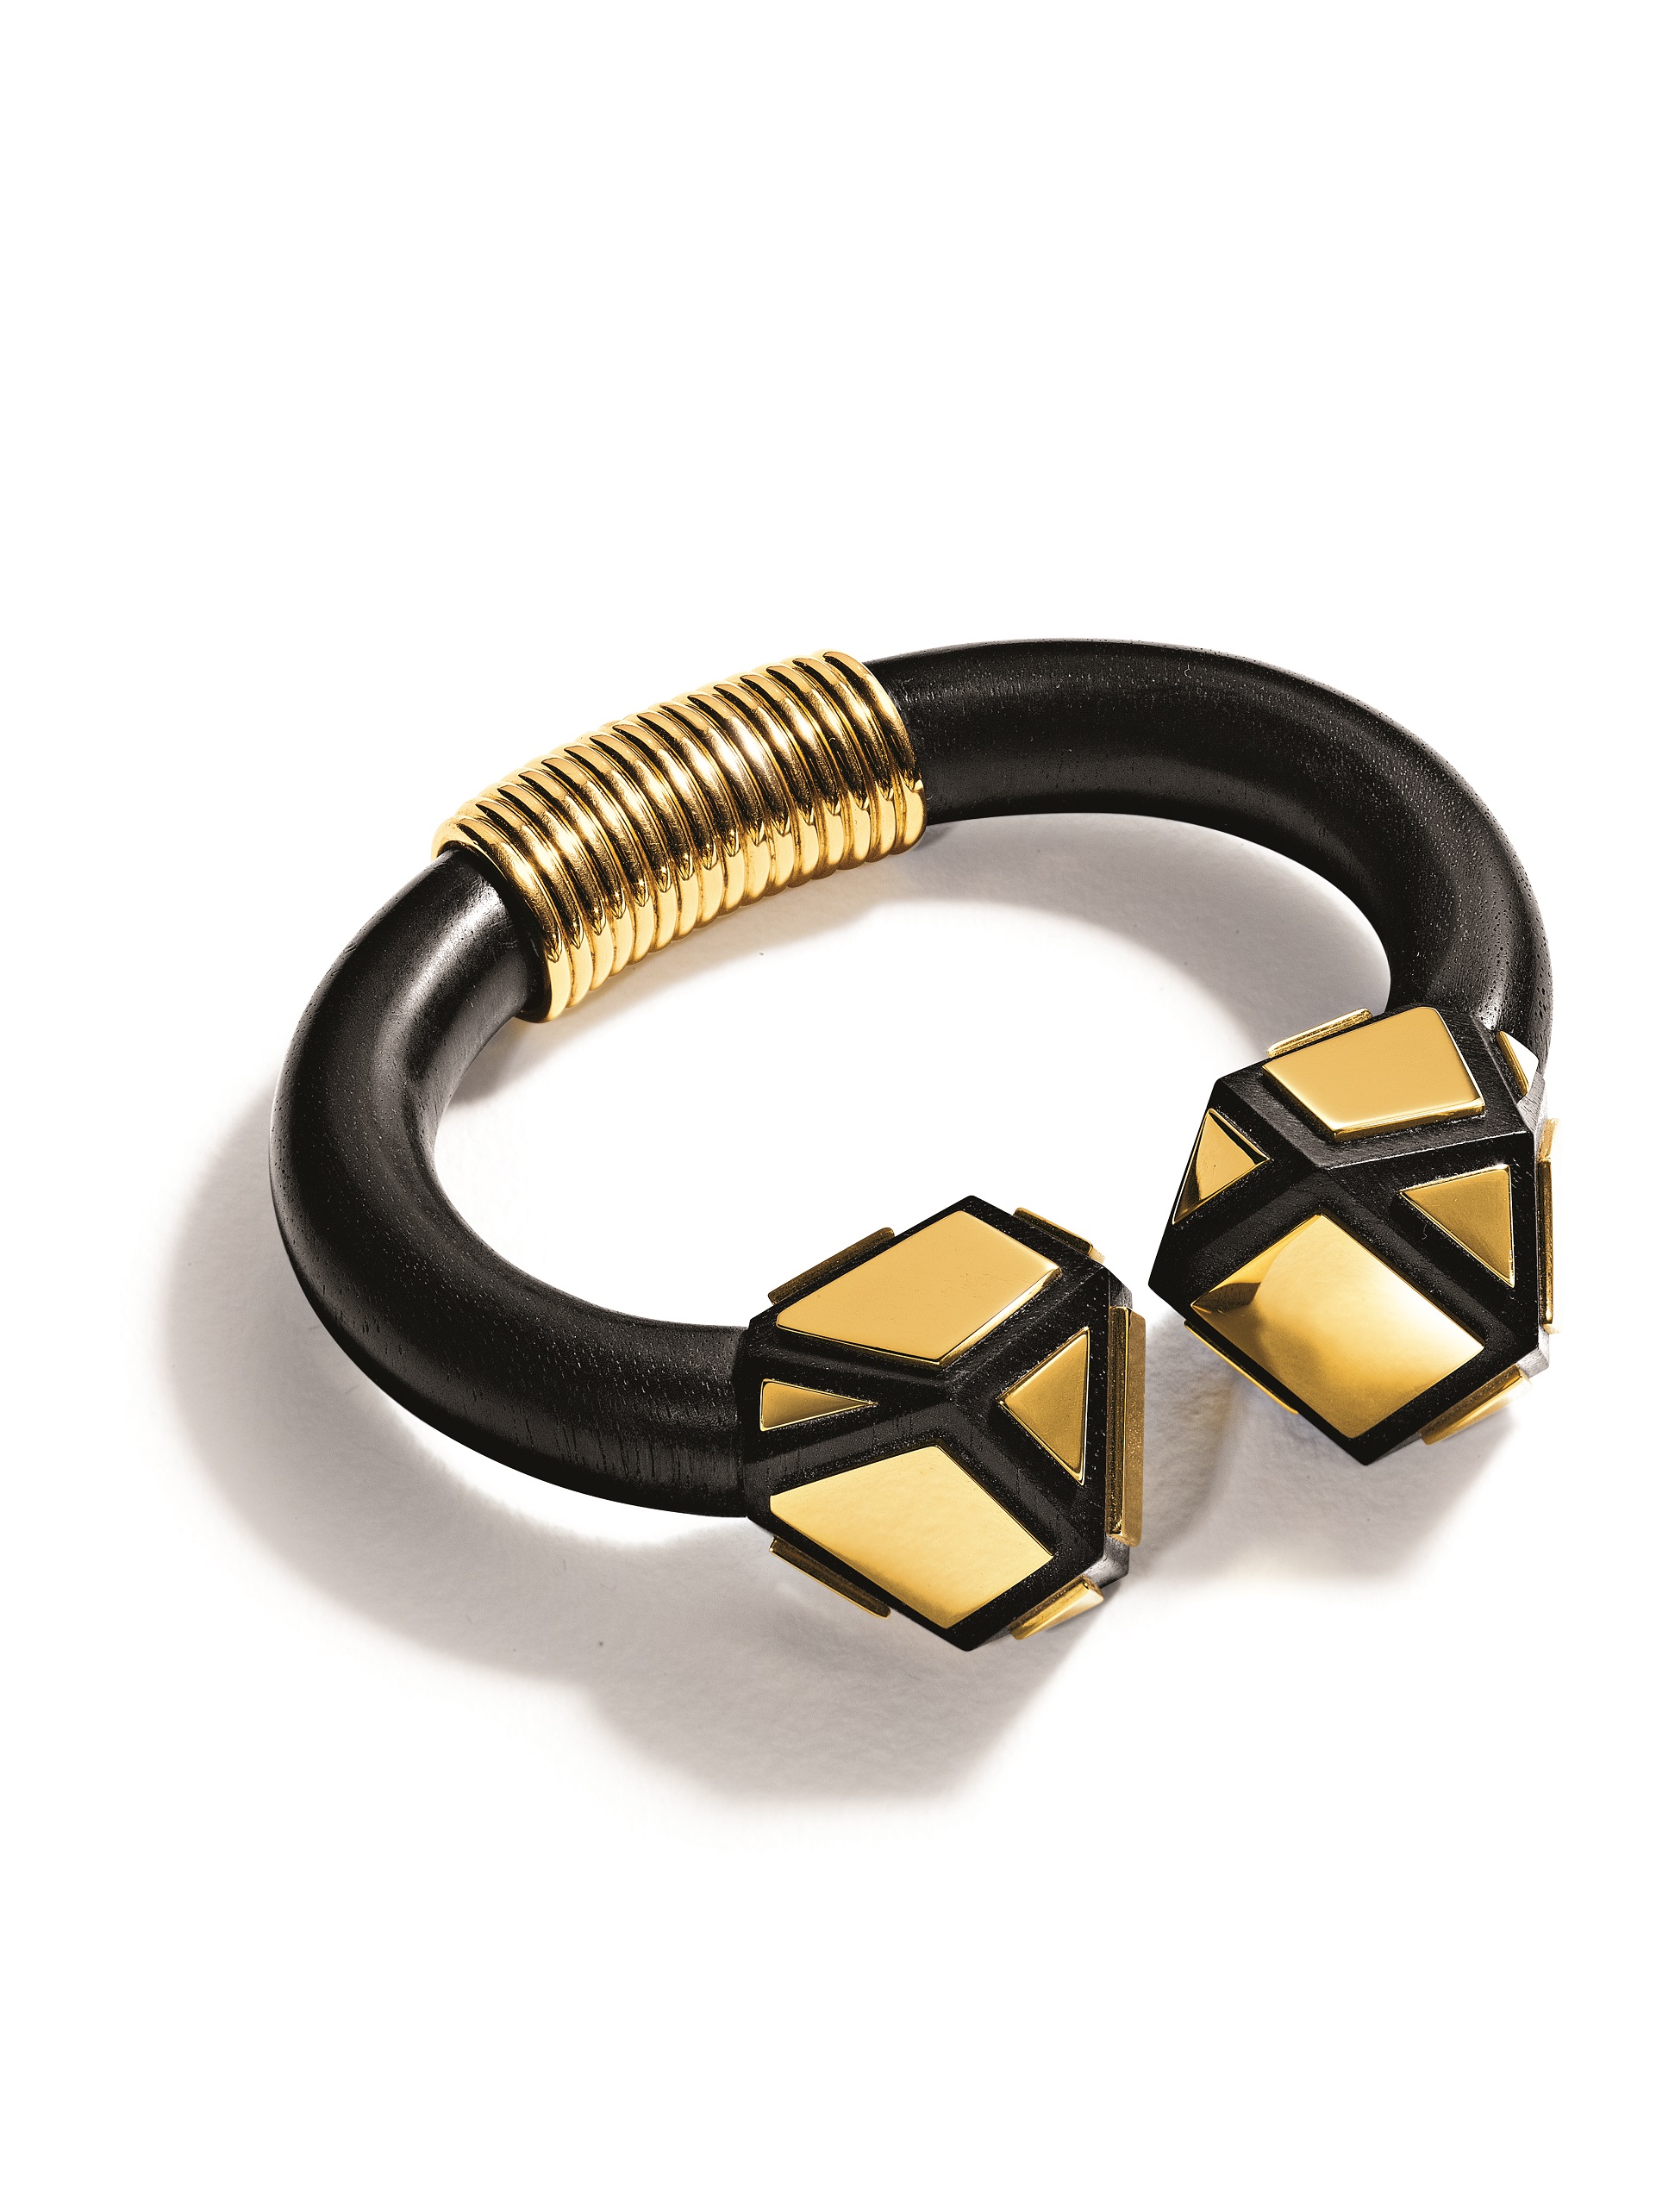 tefaf BELPERRON Congo Cuff; Black Lacquer and Gold